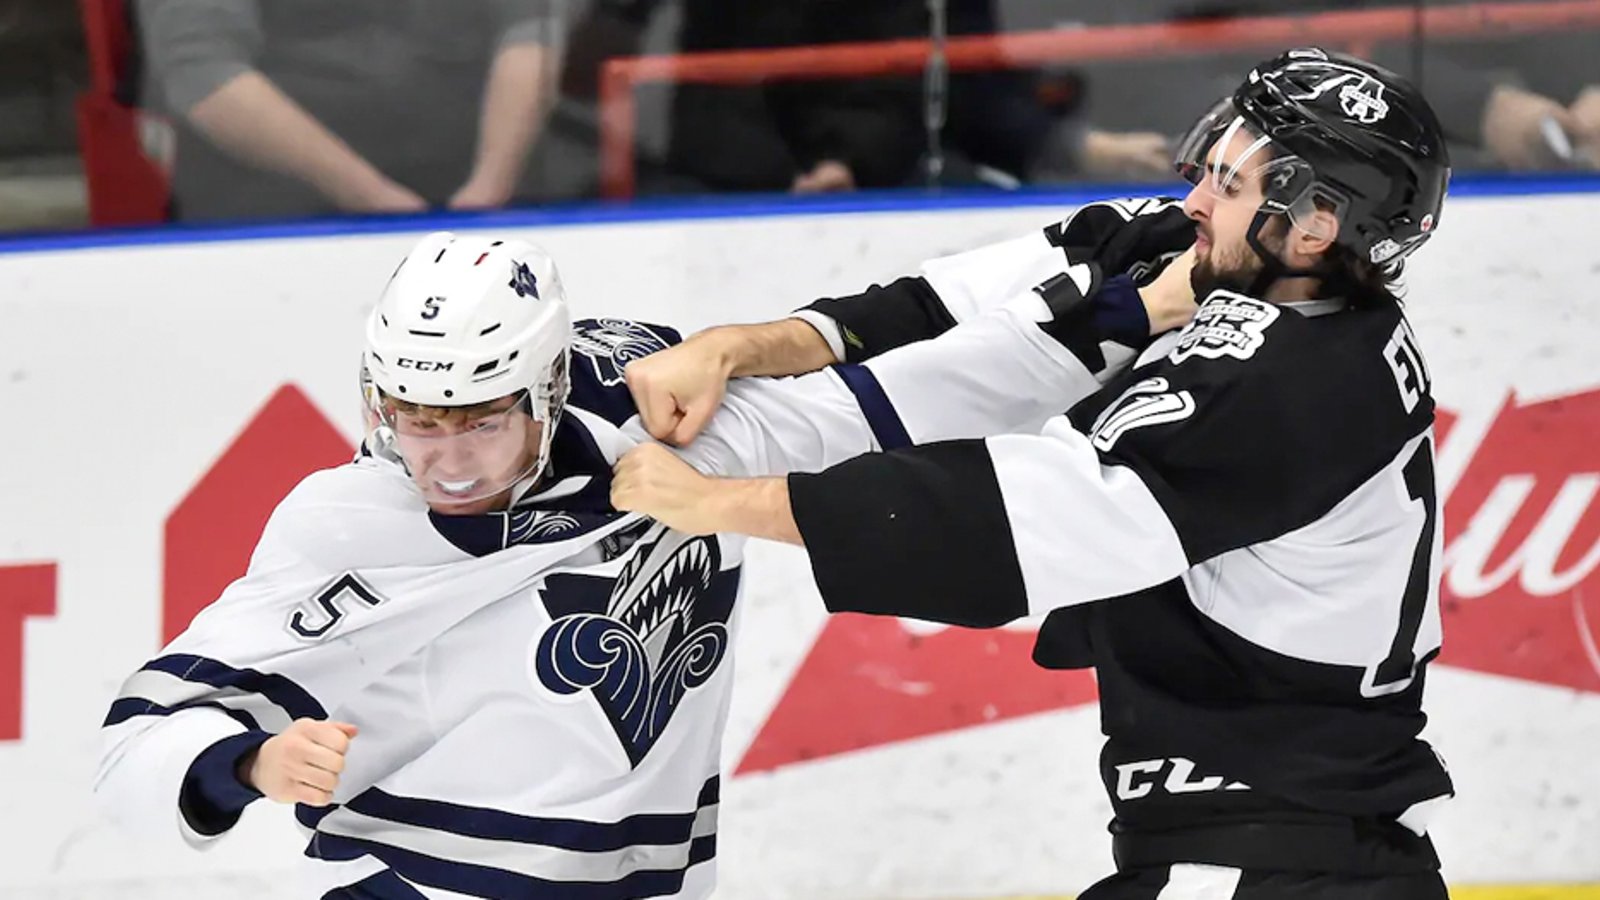 QMJHL set to eliminate fighting from the sport